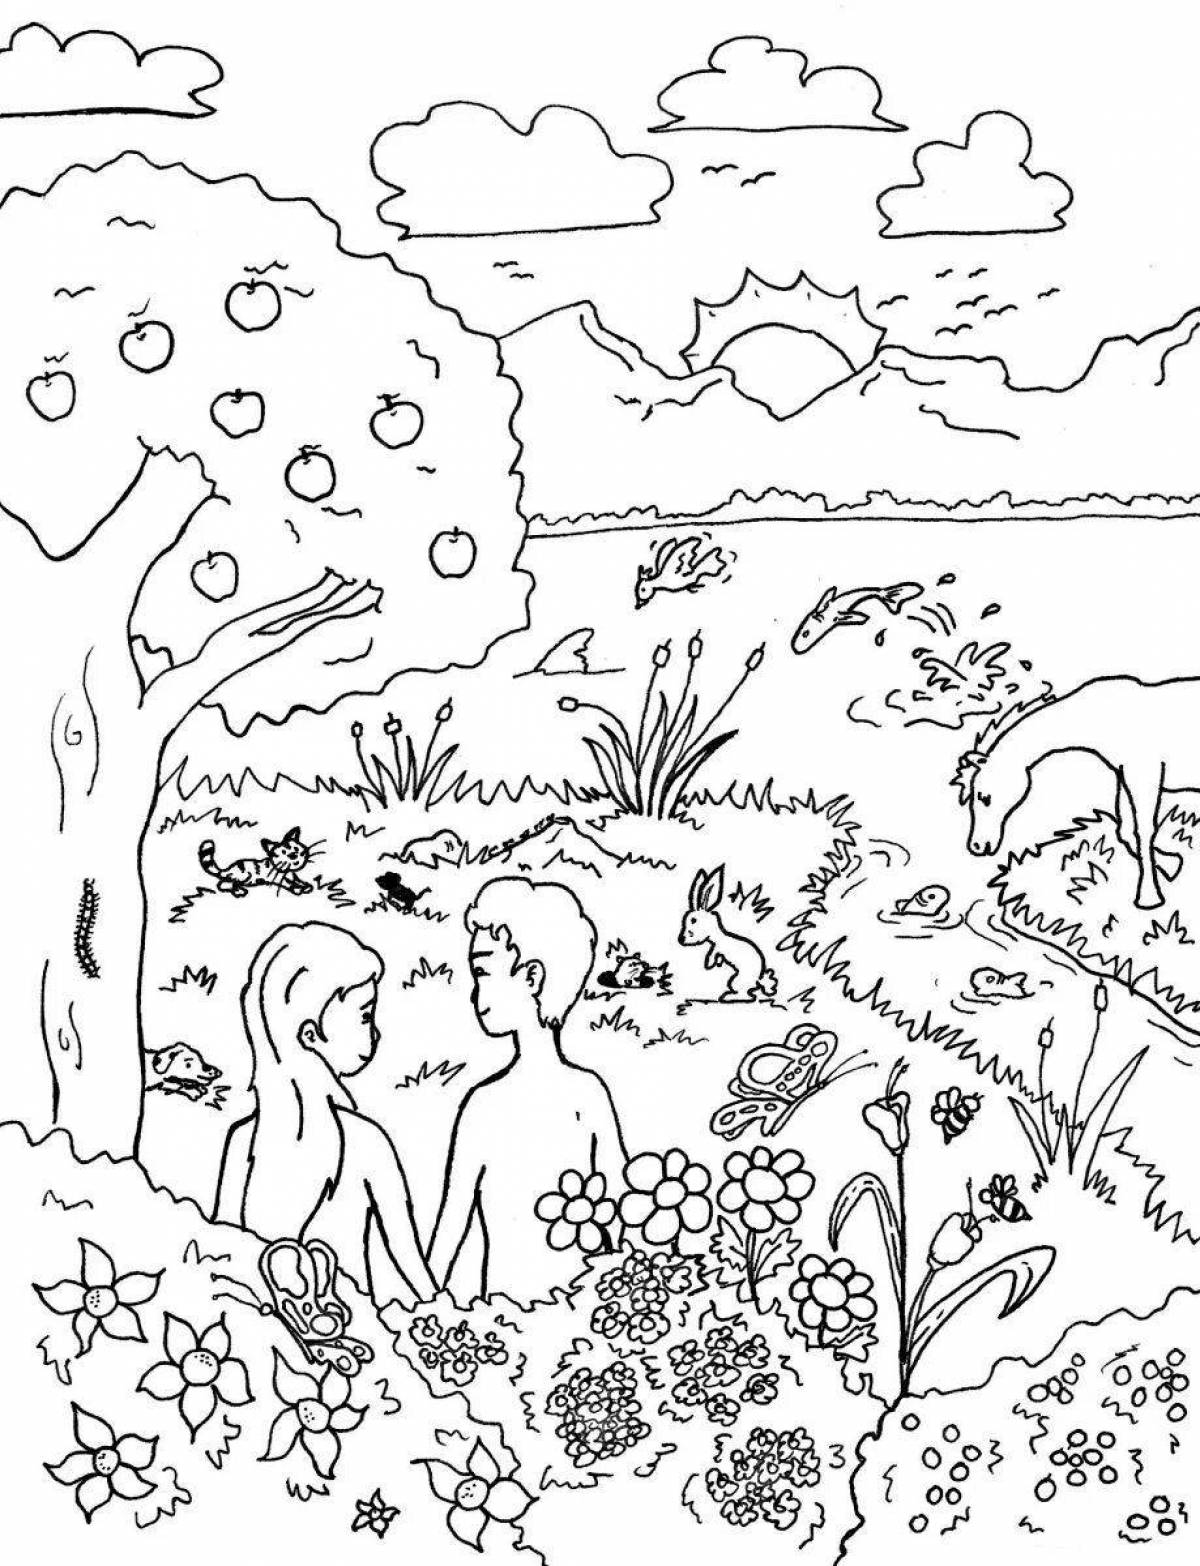 Coloring page magnificent creation of the world